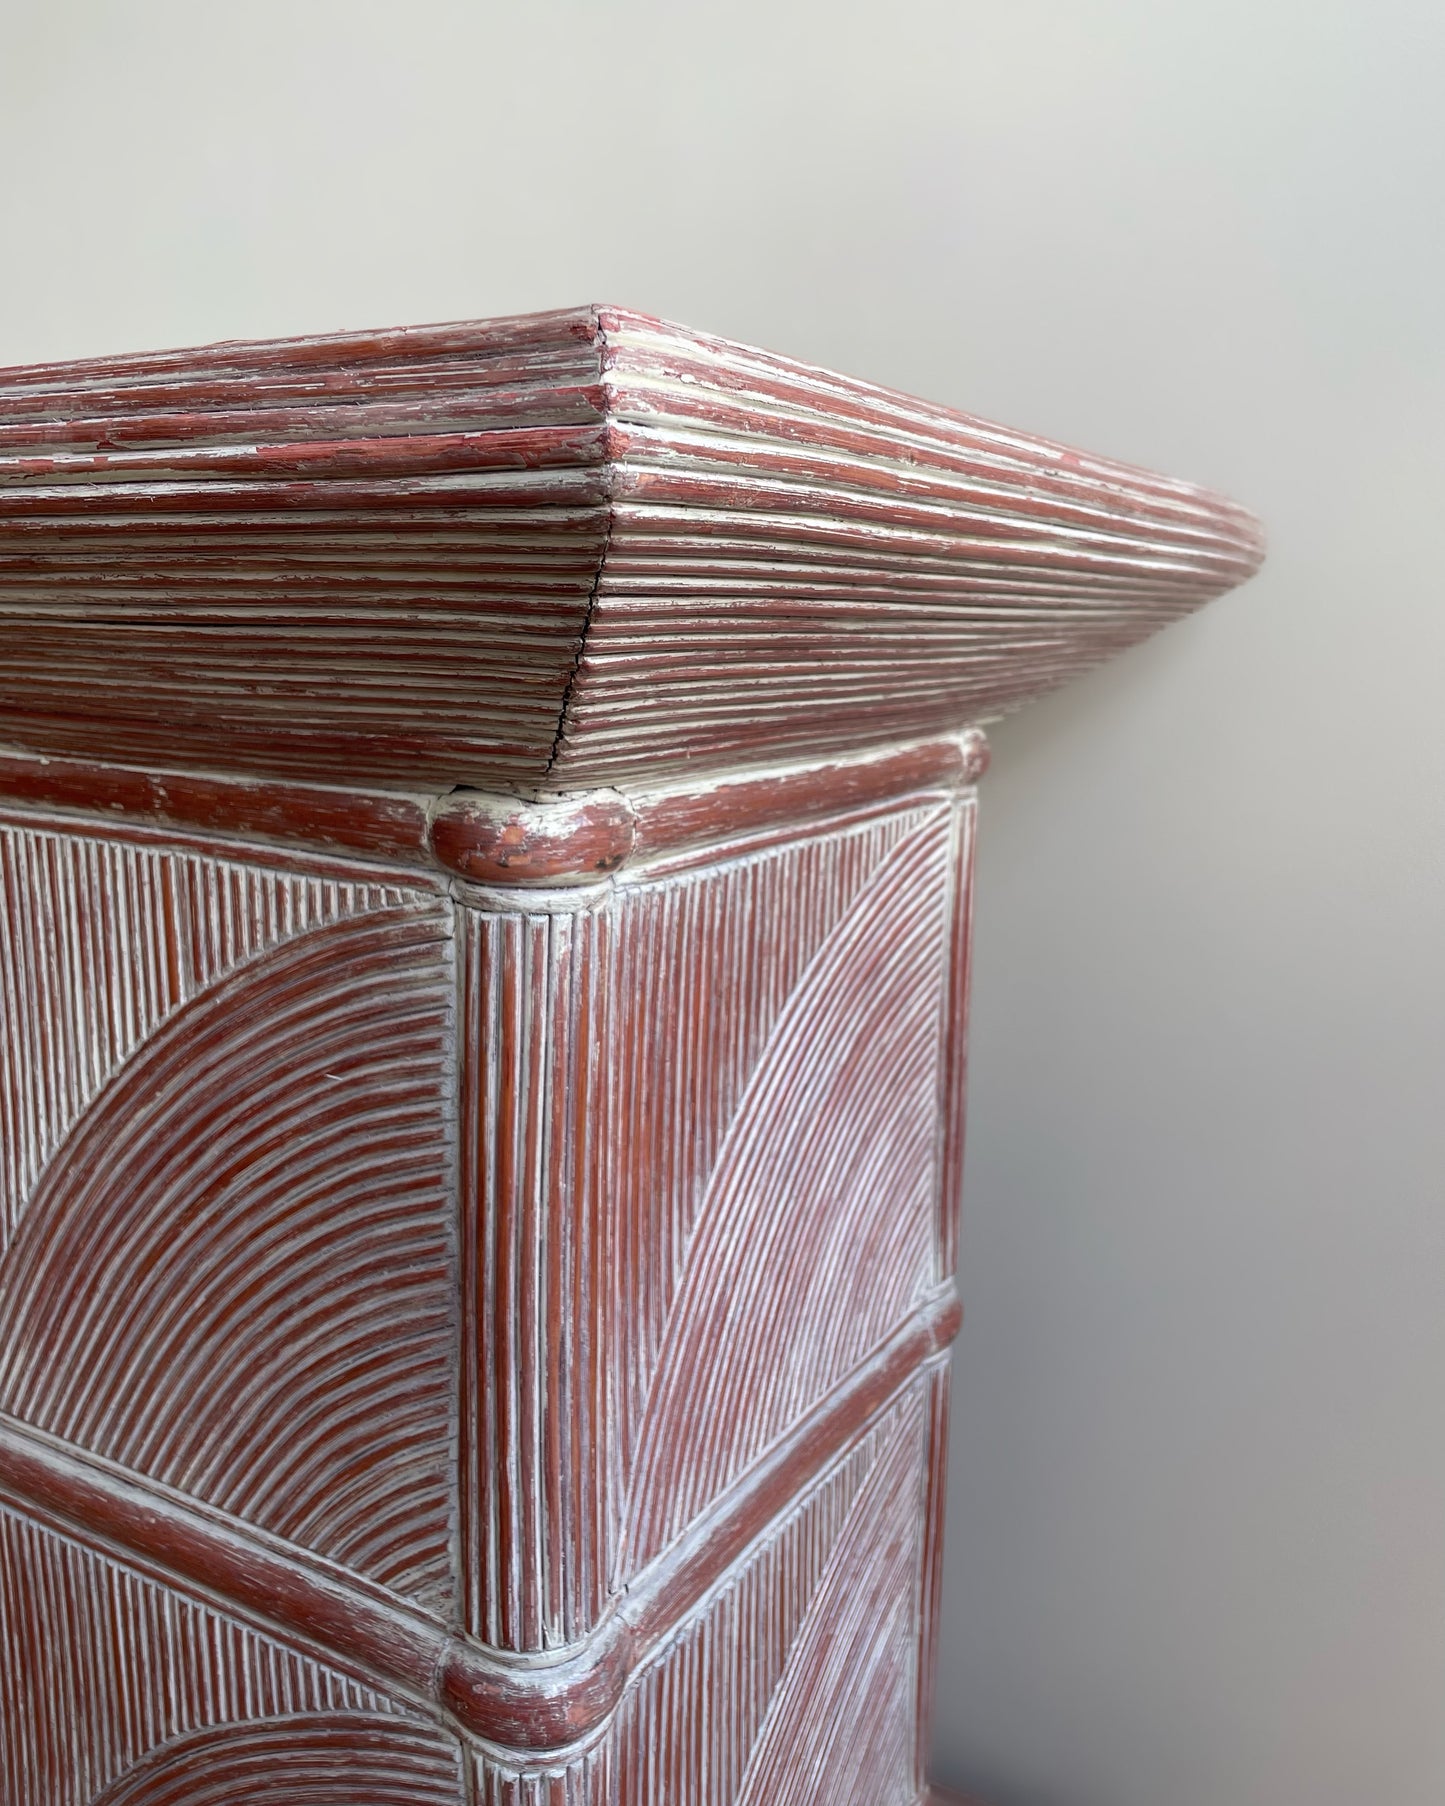 Pencil Reed Side Table